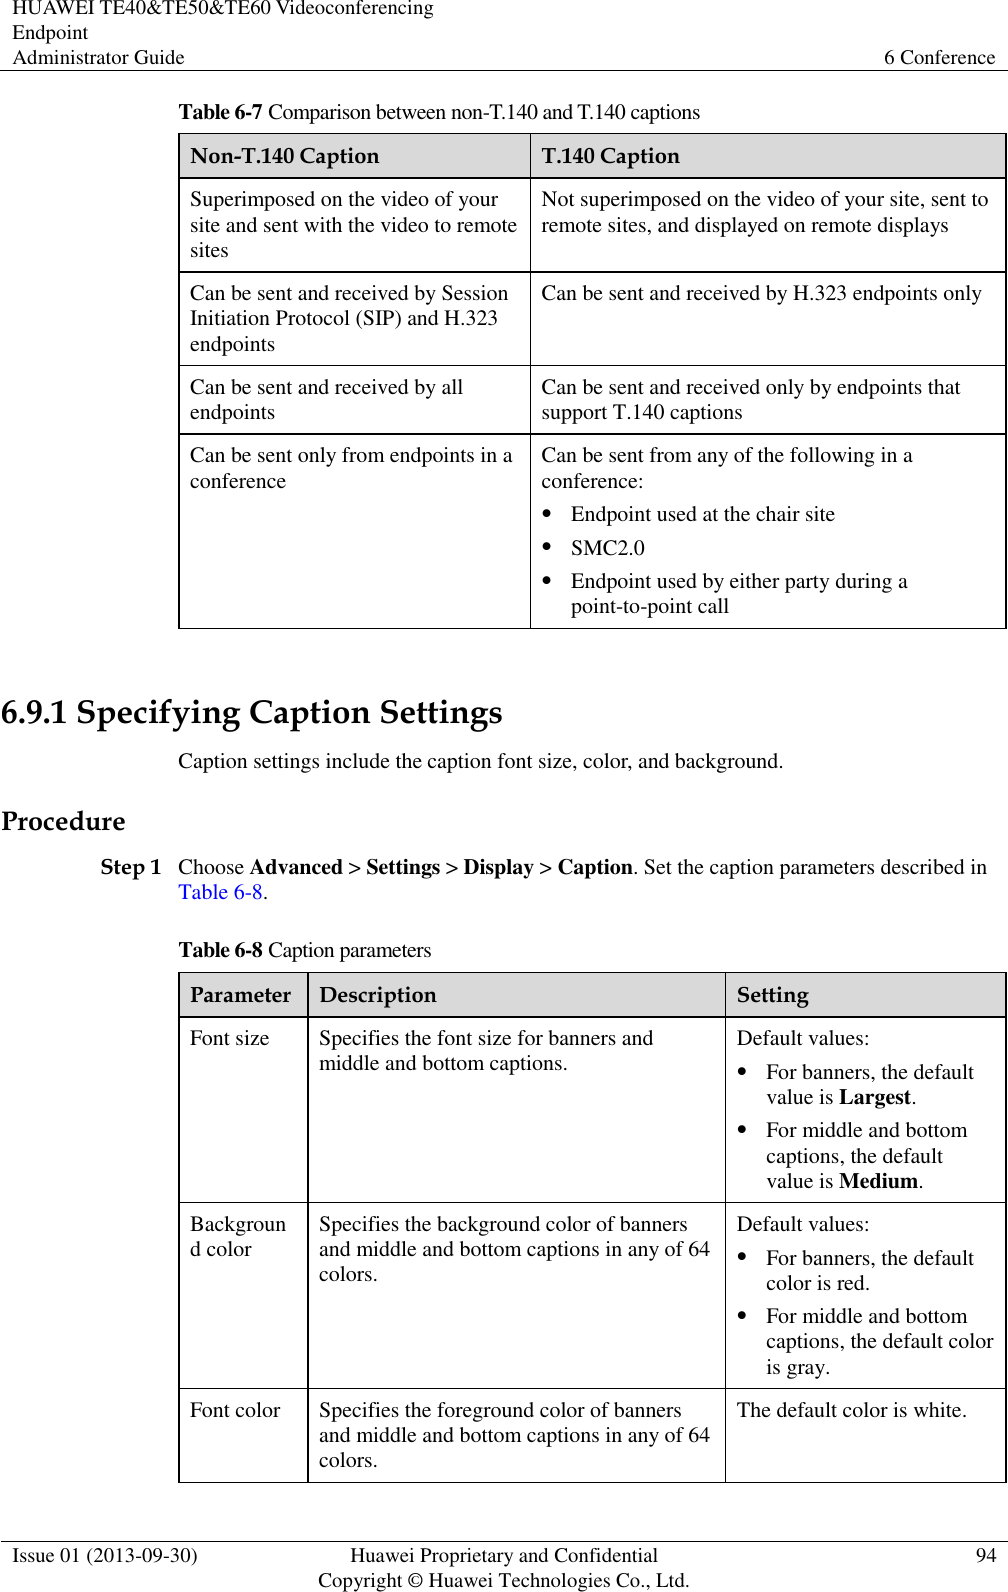 HUAWEI TE40&amp;TE50&amp;TE60 Videoconferencing Endpoint Administrator Guide 6 Conference  Issue 01 (2013-09-30) Huawei Proprietary and Confidential                                     Copyright © Huawei Technologies Co., Ltd. 94  Table 6-7 Comparison between non-T.140 and T.140 captions Non-T.140 Caption T.140 Caption Superimposed on the video of your site and sent with the video to remote sites Not superimposed on the video of your site, sent to remote sites, and displayed on remote displays Can be sent and received by Session Initiation Protocol (SIP) and H.323 endpoints Can be sent and received by H.323 endpoints only Can be sent and received by all endpoints Can be sent and received only by endpoints that support T.140 captions Can be sent only from endpoints in a conference Can be sent from any of the following in a conference:  Endpoint used at the chair site  SMC2.0  Endpoint used by either party during a point-to-point call  6.9.1 Specifying Caption Settings Caption settings include the caption font size, color, and background. Procedure Step 1 Choose Advanced &gt; Settings &gt; Display &gt; Caption. Set the caption parameters described in Table 6-8. Table 6-8 Caption parameters Parameter Description Setting Font size Specifies the font size for banners and middle and bottom captions. Default values:  For banners, the default value is Largest.  For middle and bottom captions, the default value is Medium. Background color Specifies the background color of banners and middle and bottom captions in any of 64 colors. Default values:  For banners, the default color is red.  For middle and bottom captions, the default color is gray. Font color Specifies the foreground color of banners and middle and bottom captions in any of 64 colors. The default color is white. 